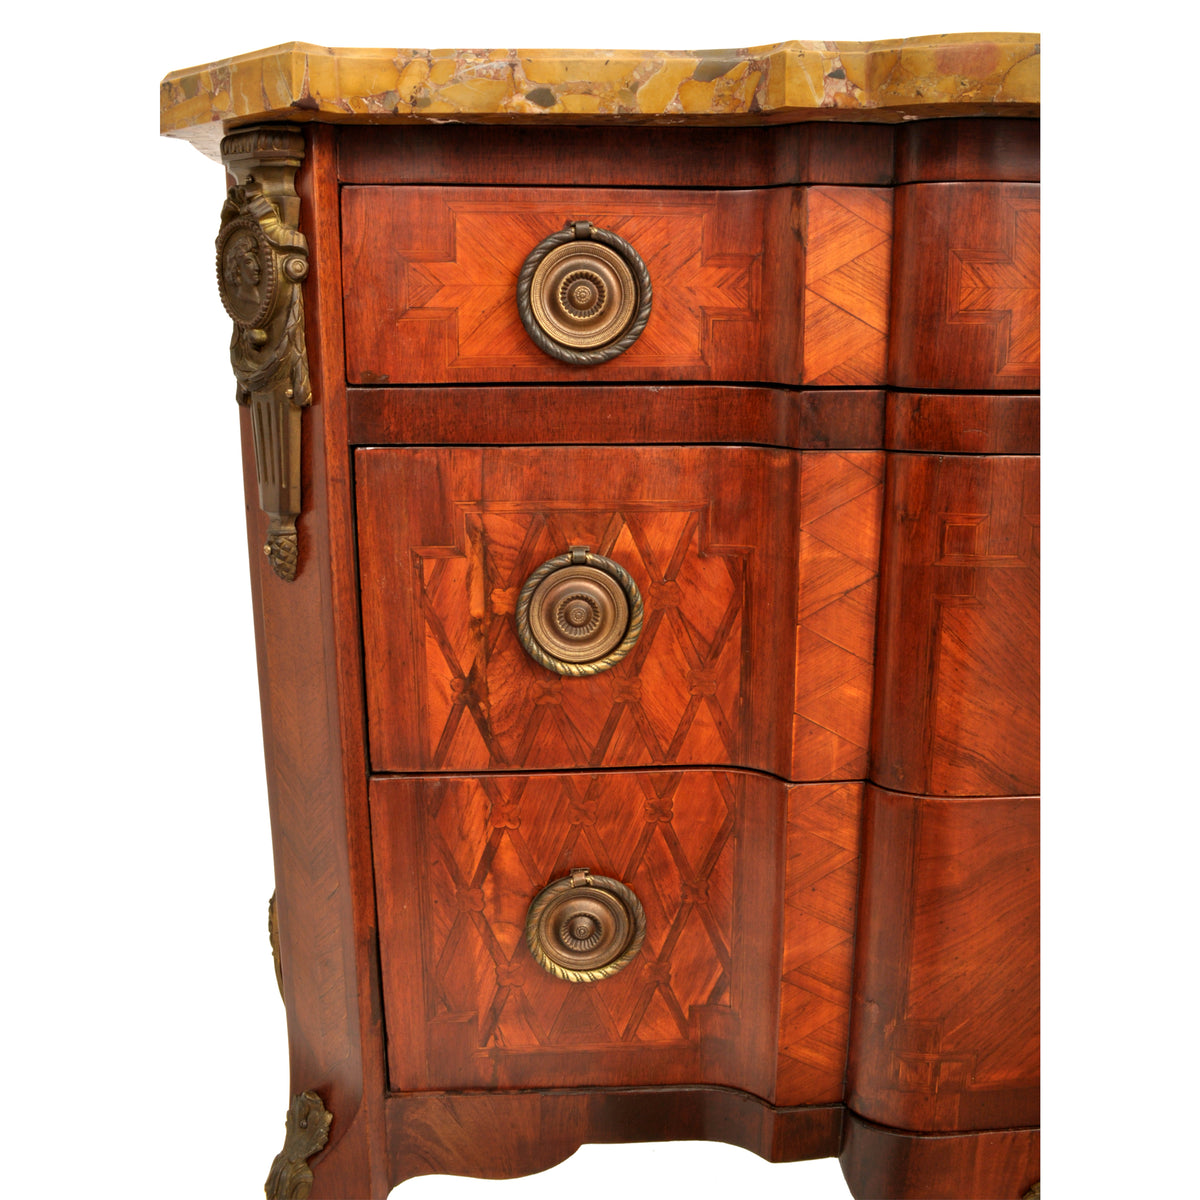 Antique French Louis XV Inlaid Parquetry Ormolu Marble Top Commode / Chest, circa 1780